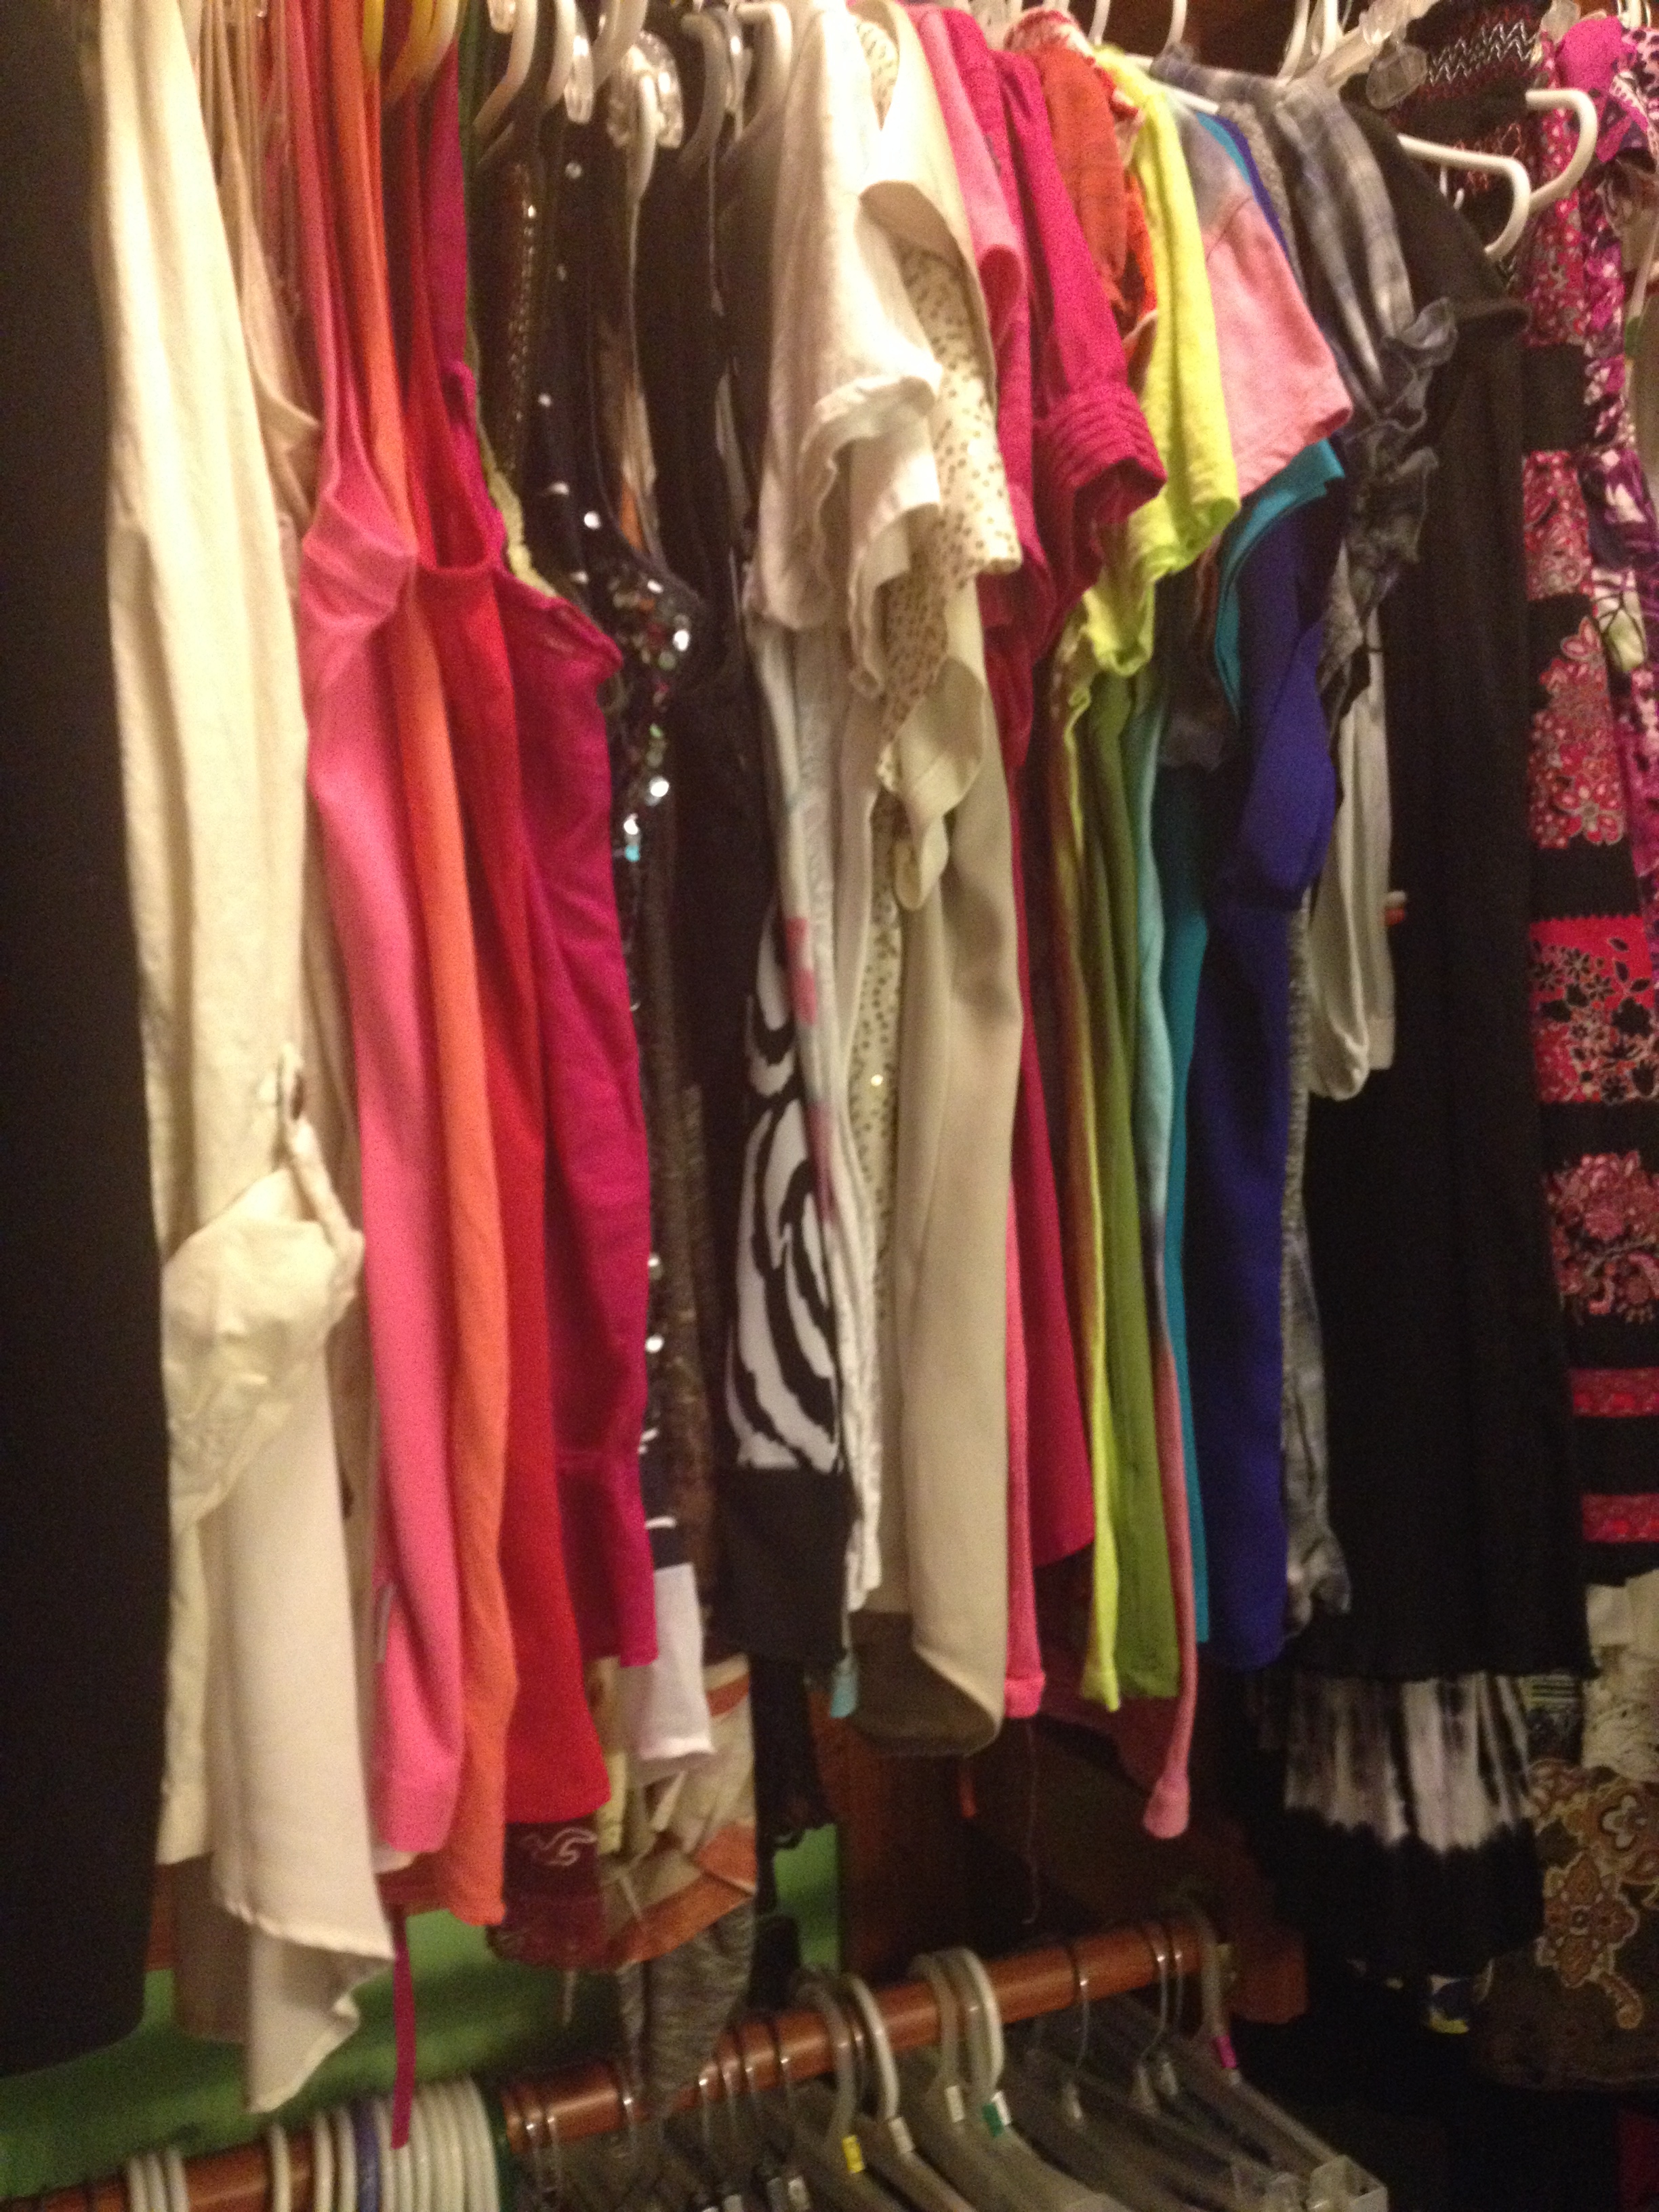 Put your closet in color order so that